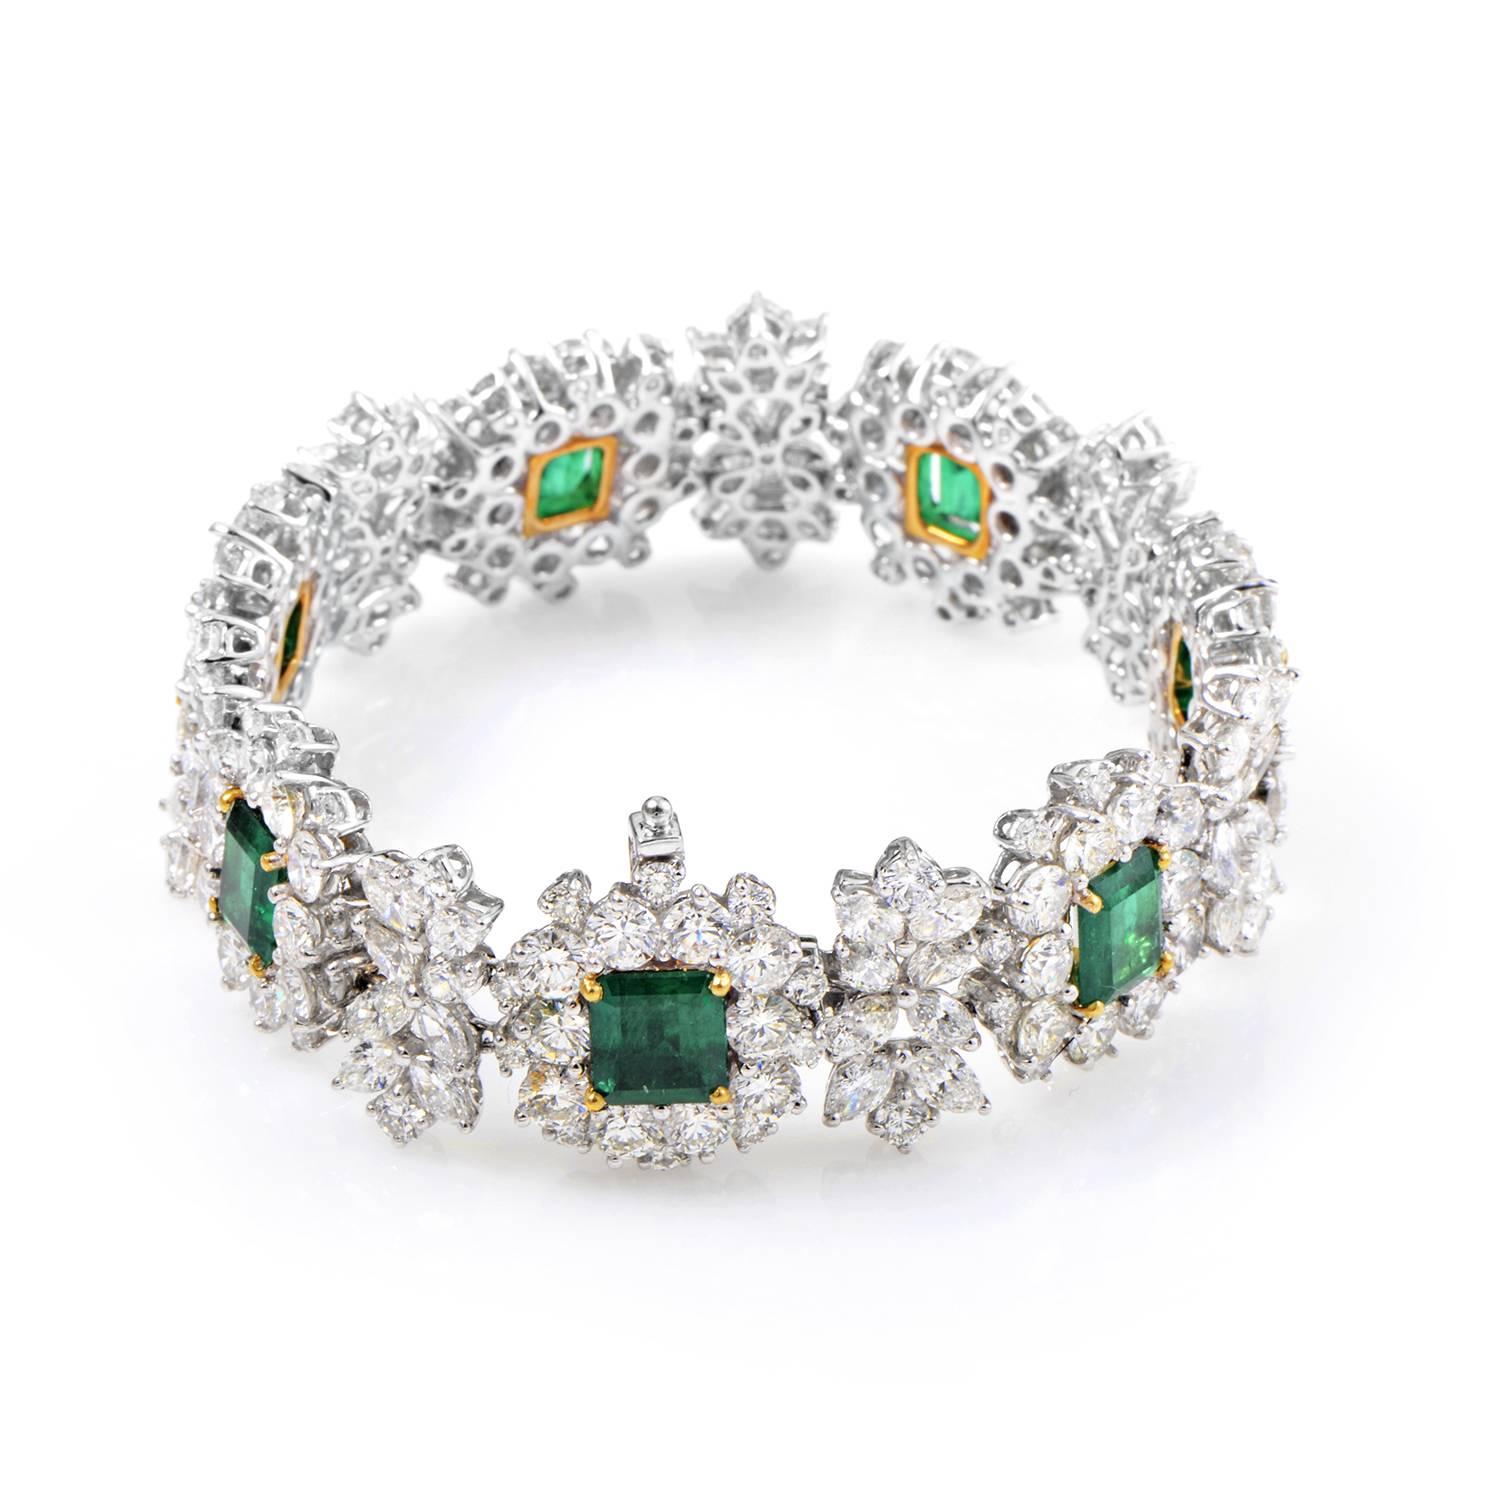 Feast your eyes upon the decadent design of this lavishly gem-encrusted bracelet. The bracelet is made of shining platinum that is set with varying cuts of diamonds, weighing in total 18.20cttw. Lastly, seven emeralds, weighing in total 10.60cttw